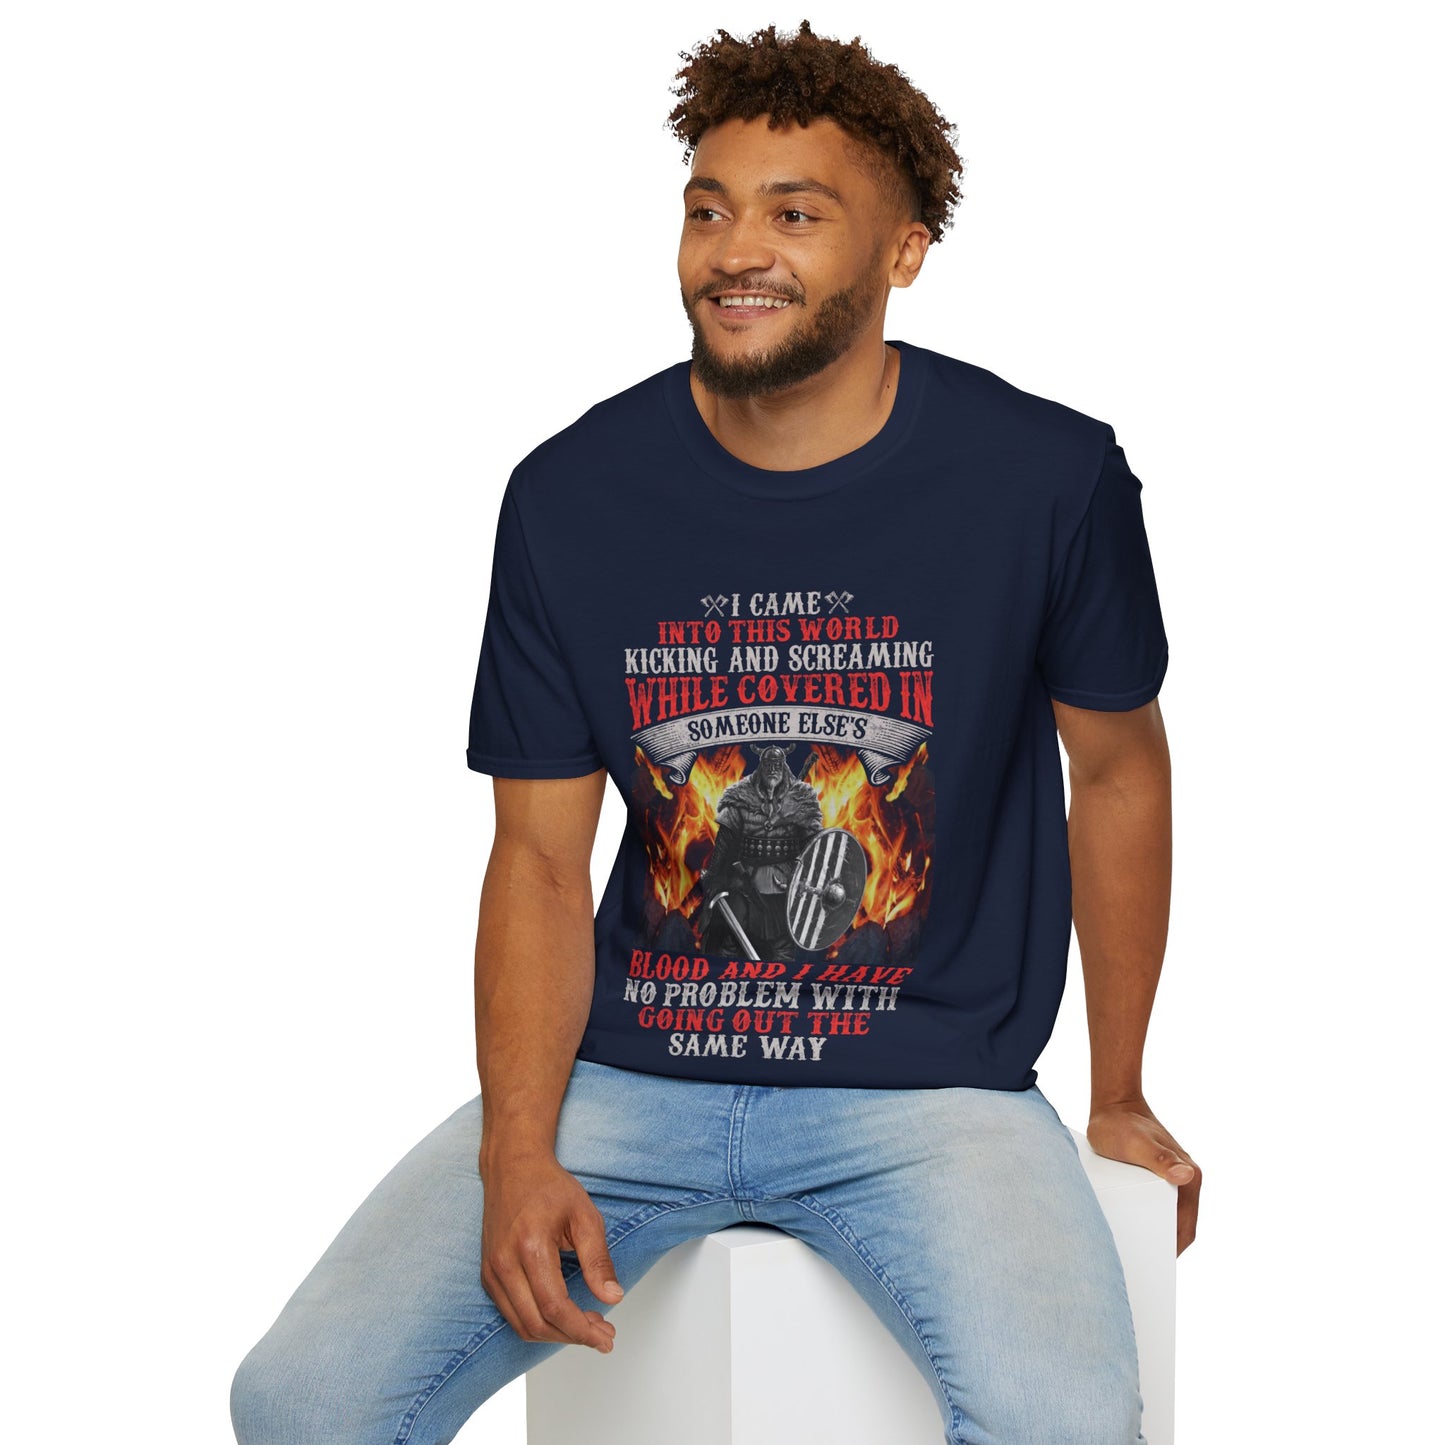 I Came Into This World Kicking And Screaming While Covered In Someone Else Blood And I Have No Problem With Going Out The Same Way Viking T-Shirt